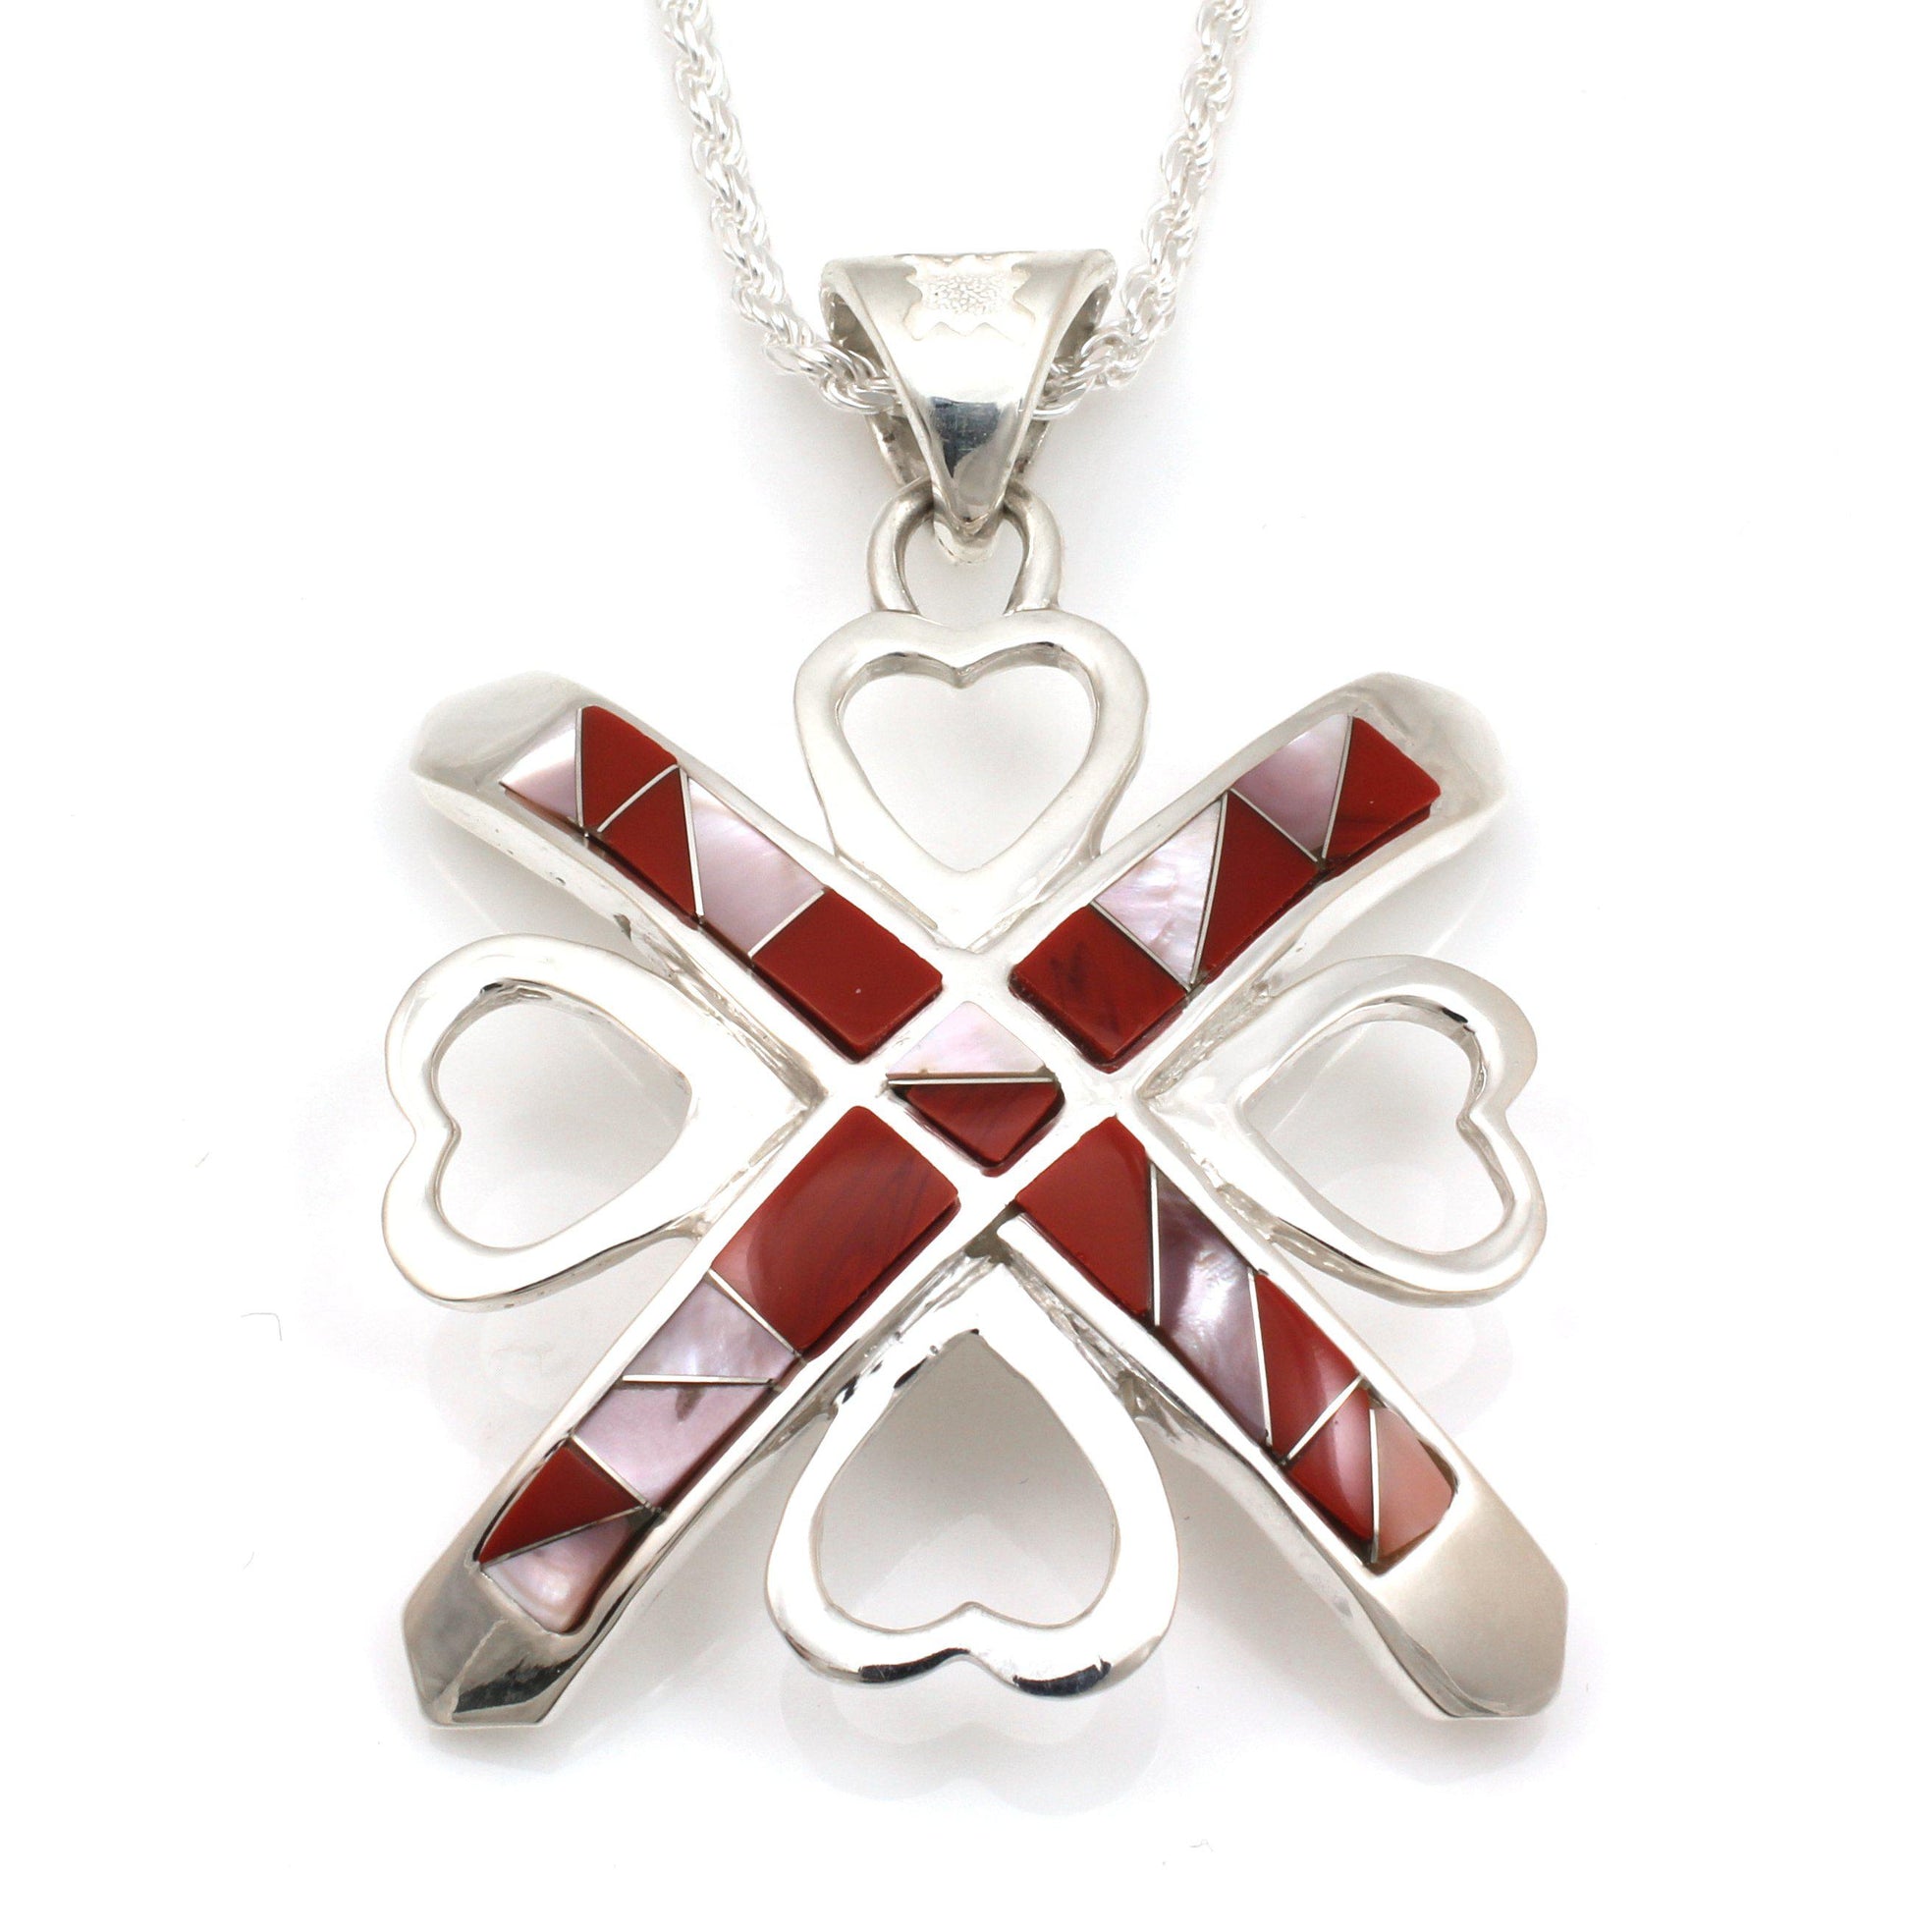 Morning Star And Heart Pendant-Jewelry-Ben Nighthorse-Sorrel Sky Gallery